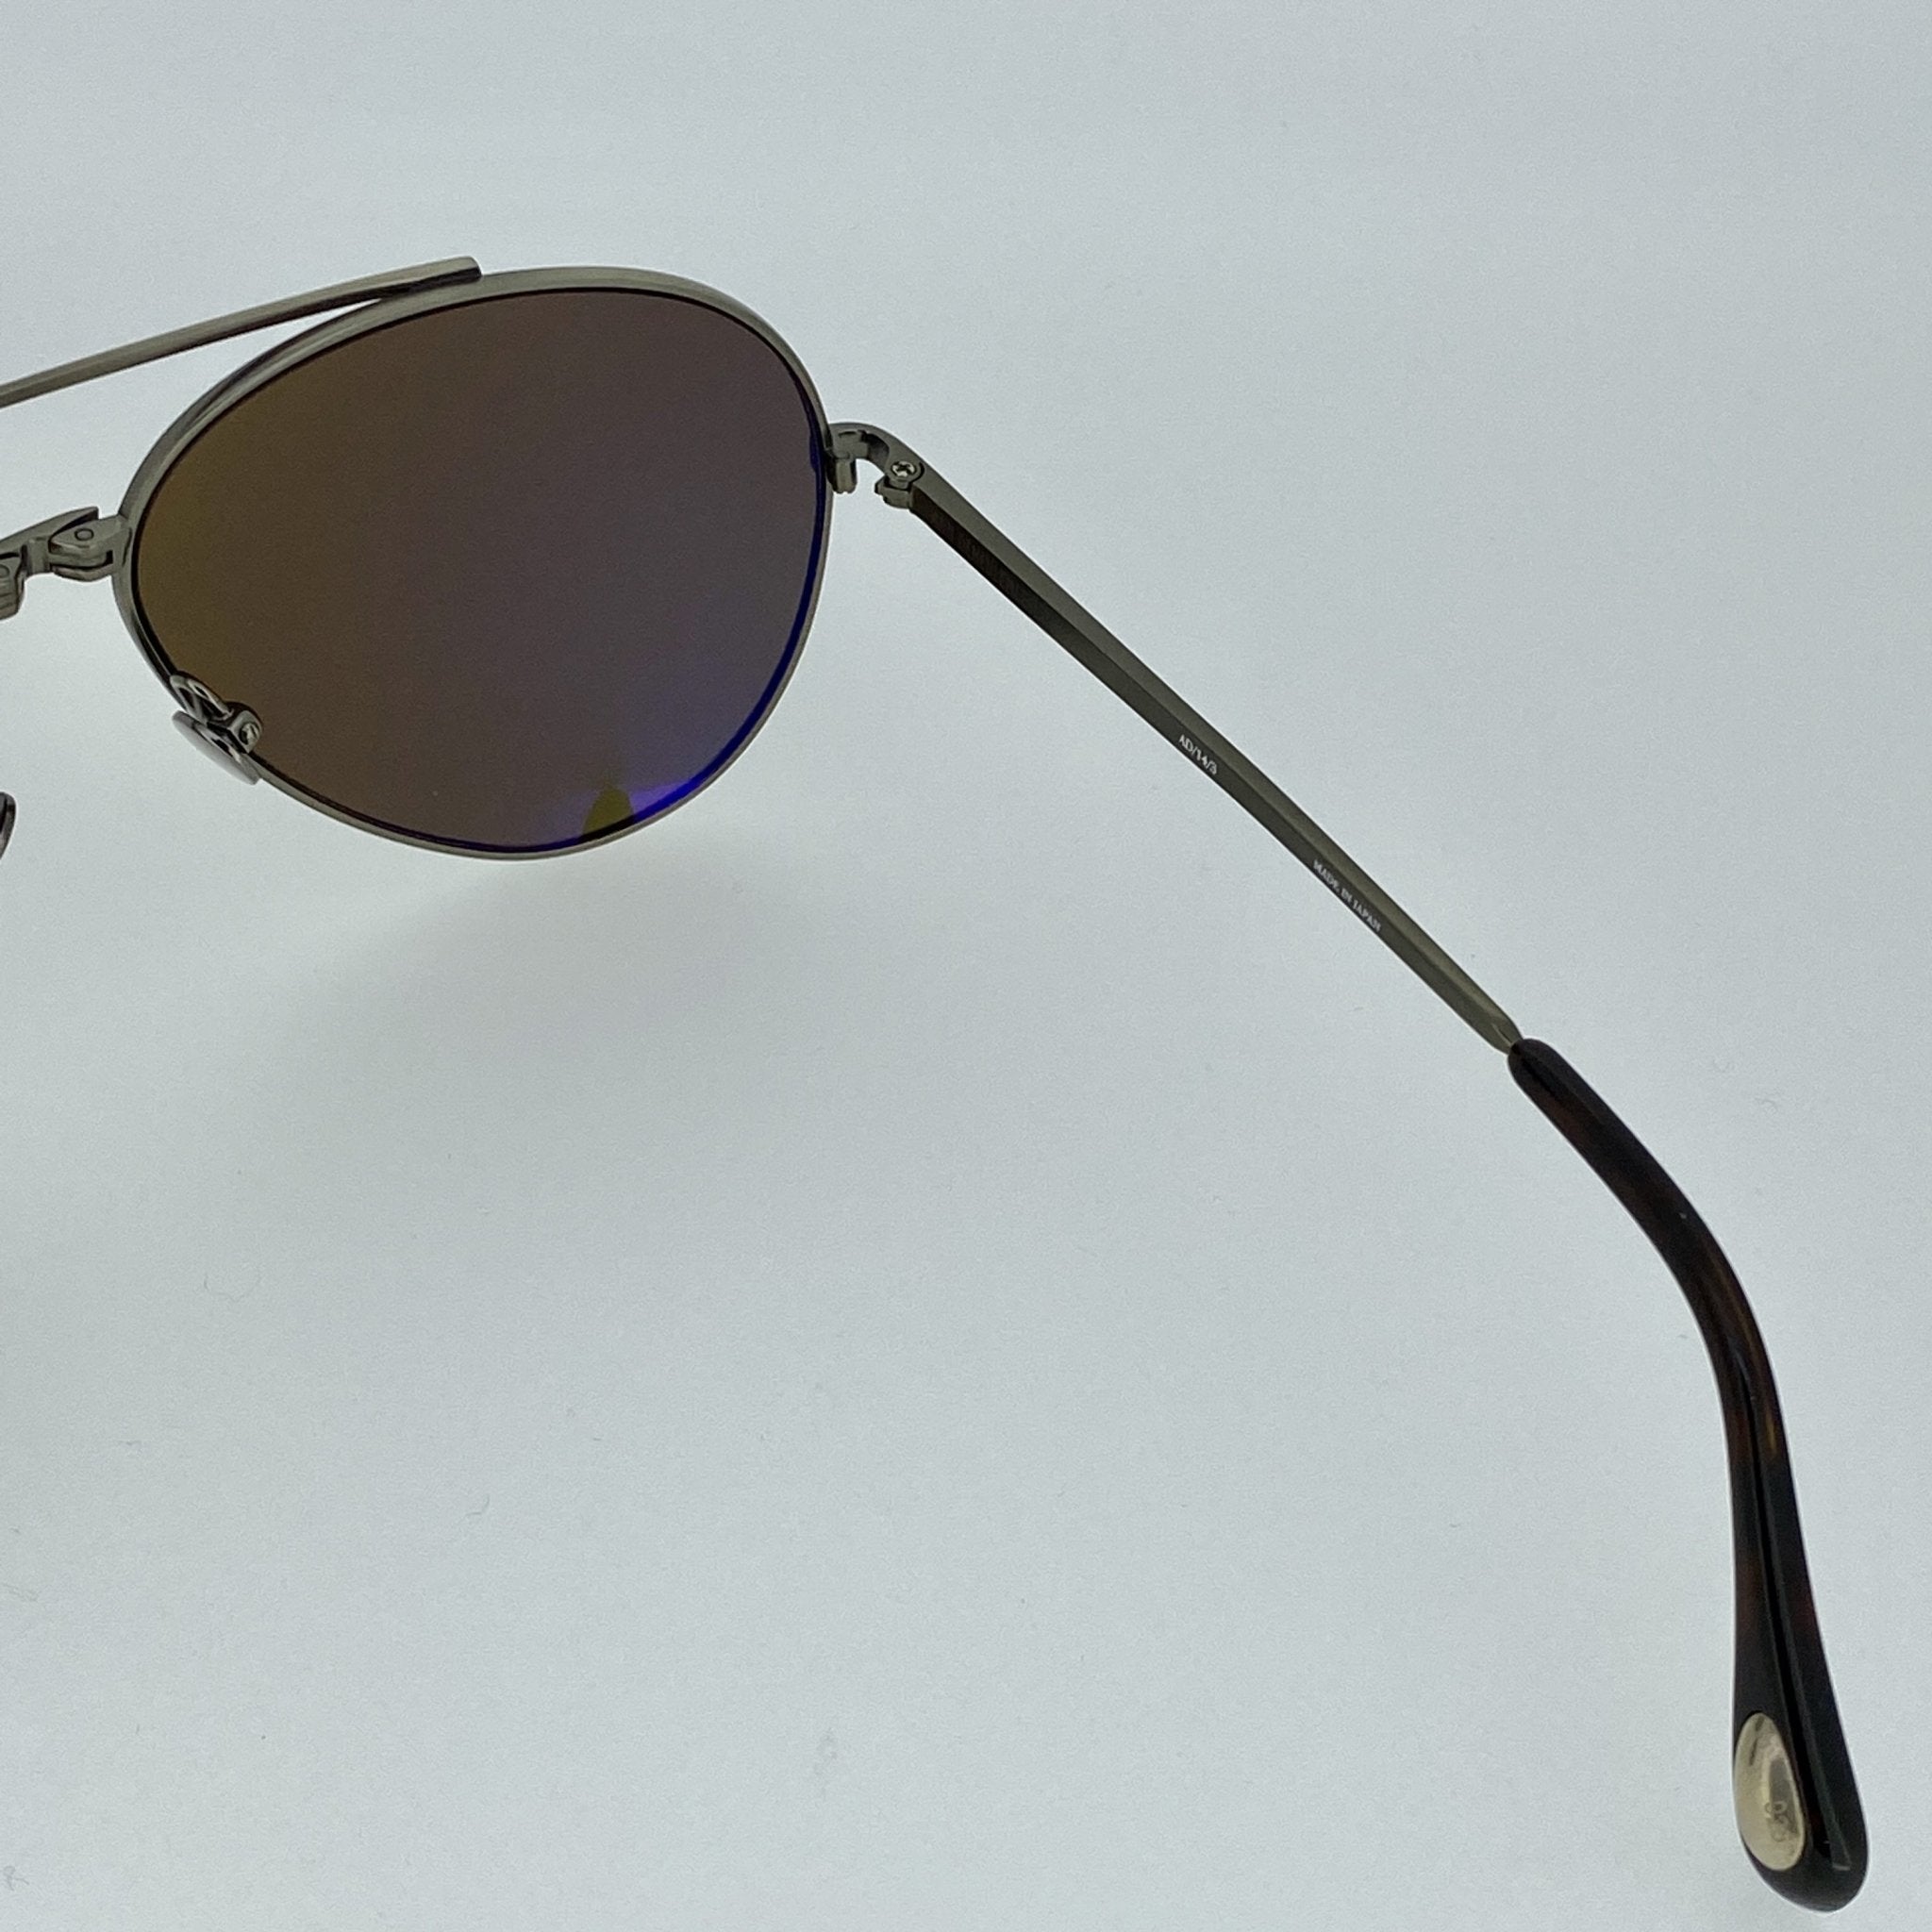 Ann Demeulemeester Sunglasses Titanium Brushed Antique Silver 925 Silver with Brown Lenses Category 3 Dark Tint AD14C3SUN - Watches & Crystals